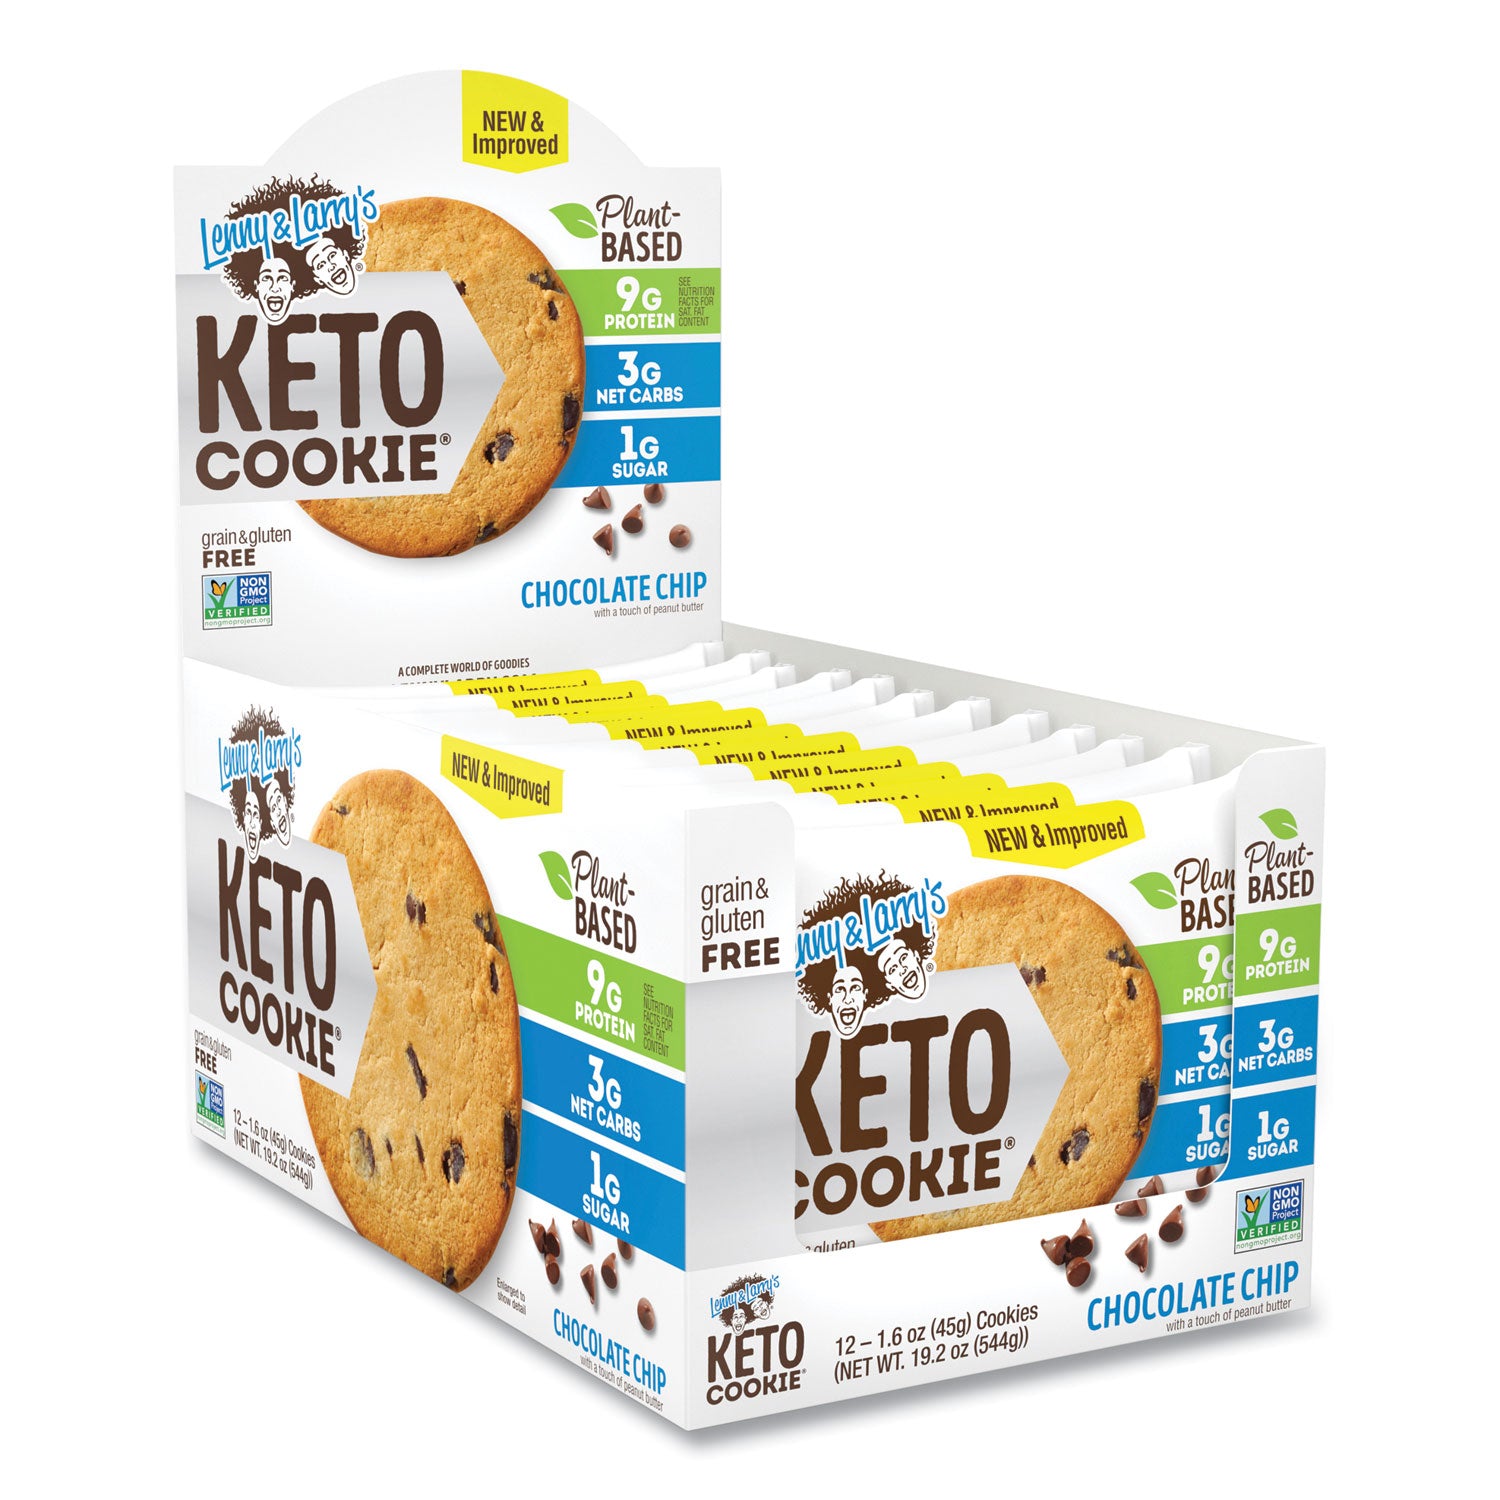 keto-chocolate-chip-cookie-chocolate-chip-16-oz-packet-12-pack-ships-in-1-3-business-days_grr22002083 - 1